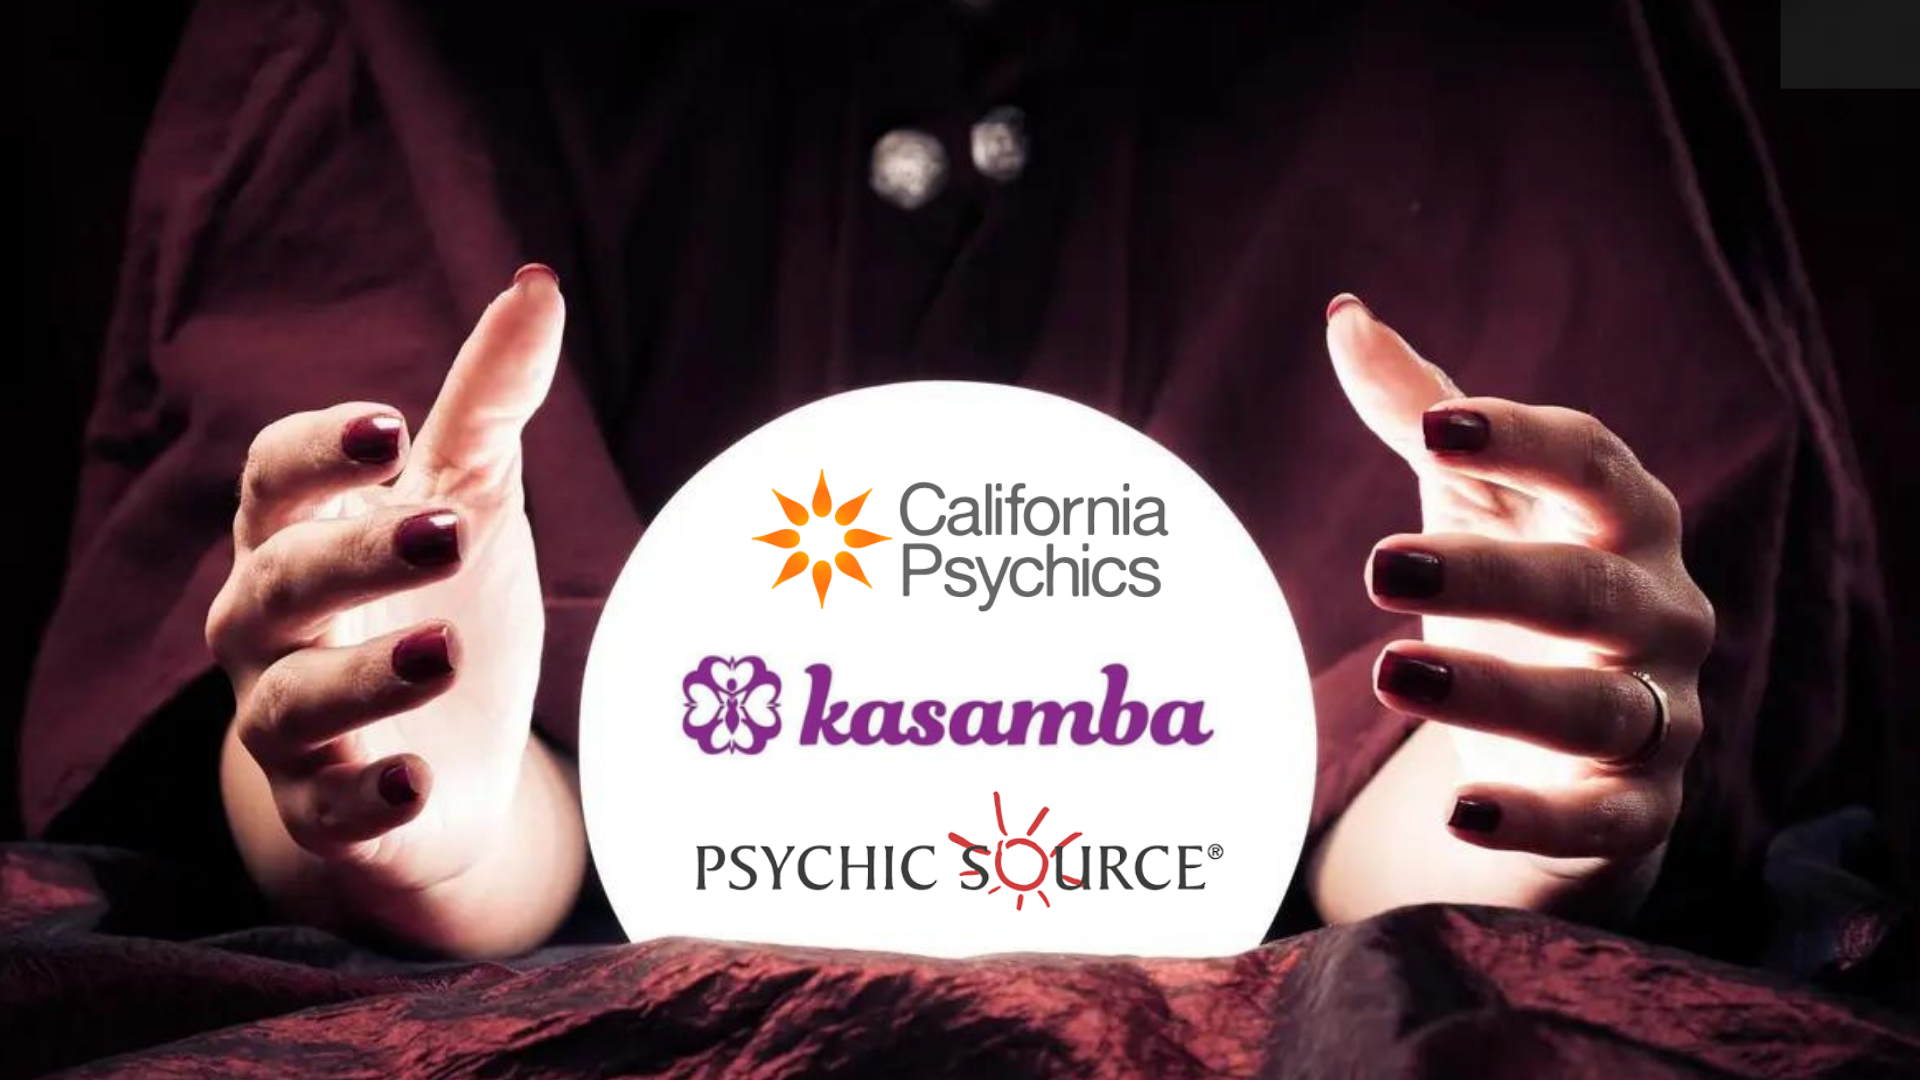 A psychic and a crystal ball with psychic websites logos